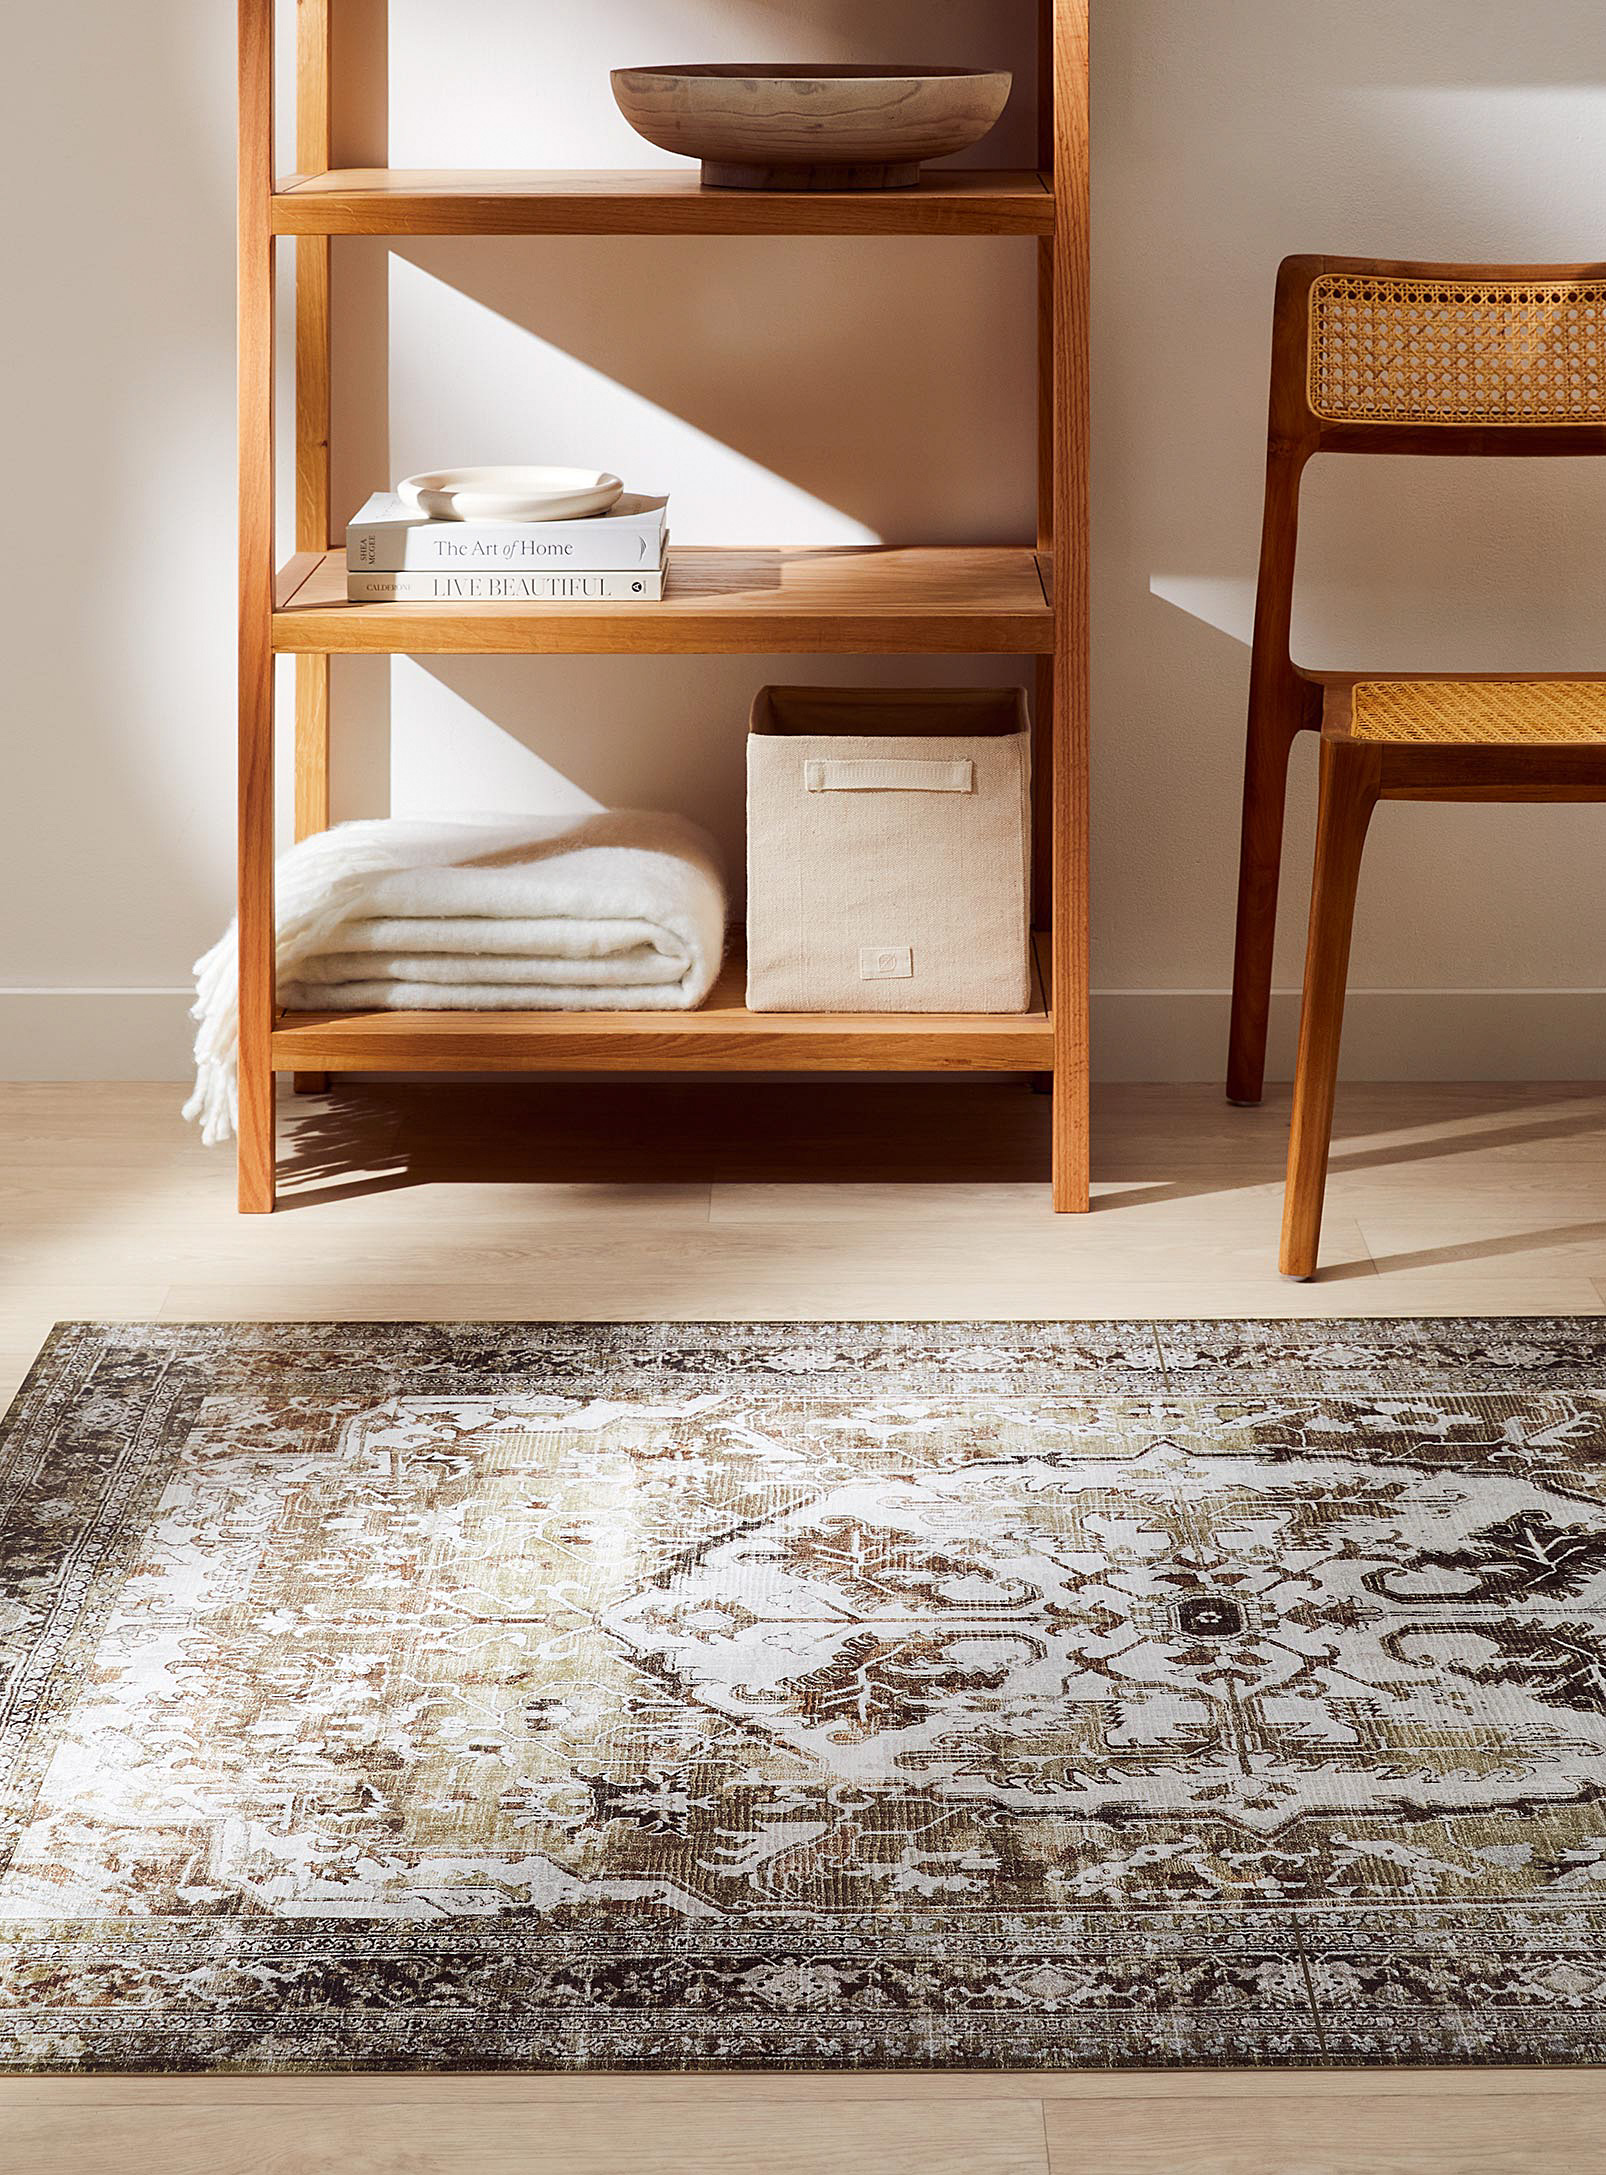 Adama Heritage Frame Vinyl Rug See Available Sizes In Patterned Brown